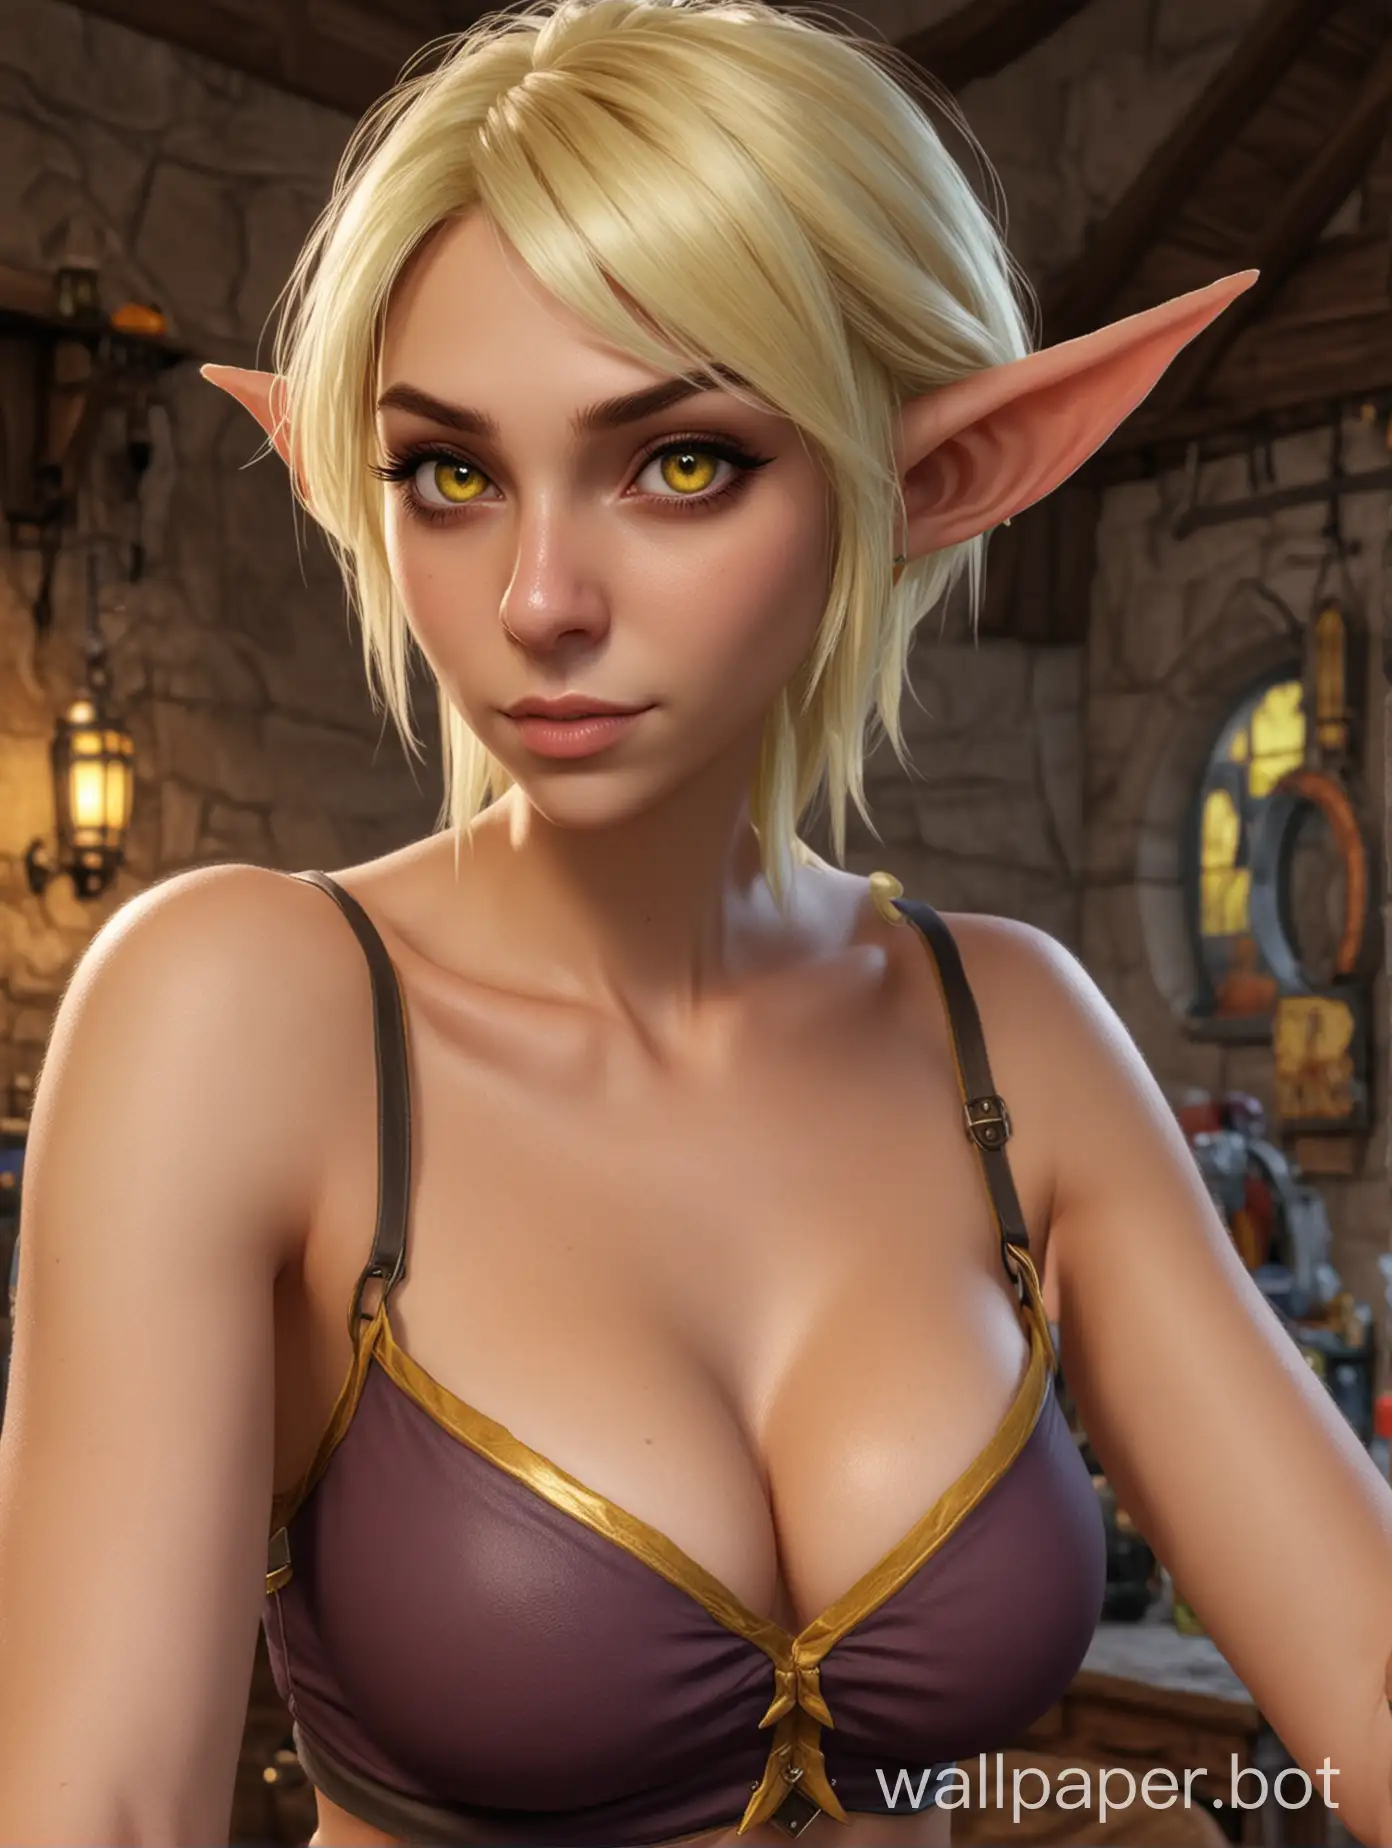 (world of warcraft, in a realistic style,) 
(Girl, hybrid: elf-goblin)
(Build: tall, medium weight, with yellow eyes, with short hair,)
(Voluminous full breasts, Increase breast size by 3 times)
(In a tank top)
In the apartment
Selfie